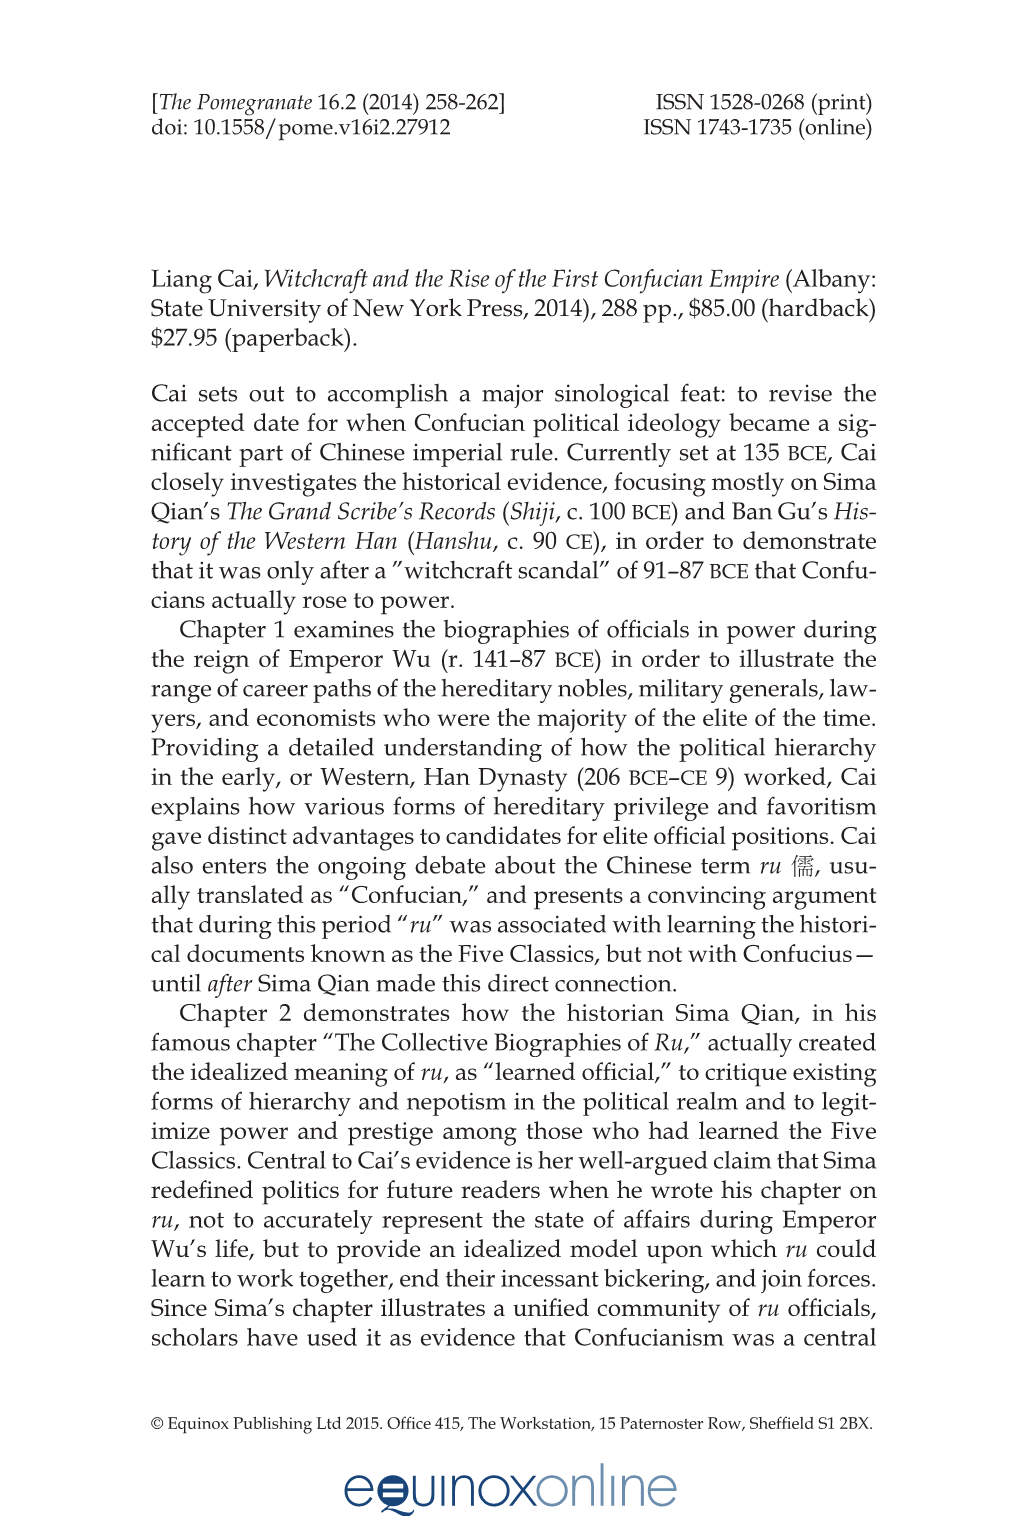 Liang Cai, Witchcraft and the Rise of the First Confucian Empire (Albany: State University of New York Press, 2014), 288 Pp., $85.00 (Hardback) $27.95 (Paperback)